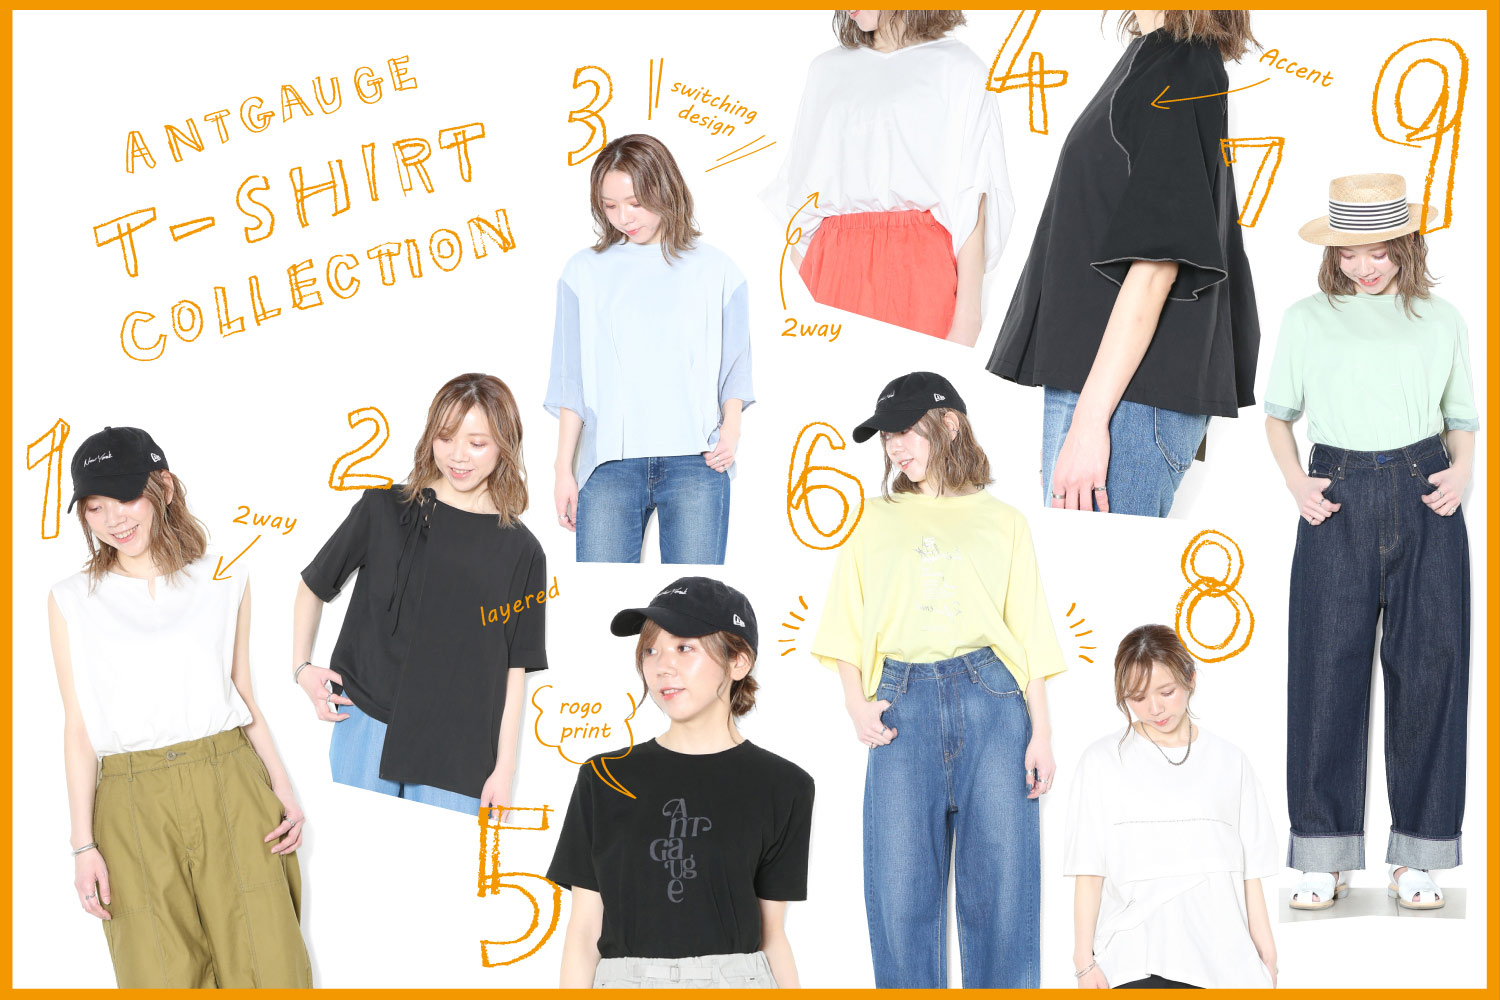 Tシャツ COLLECTION